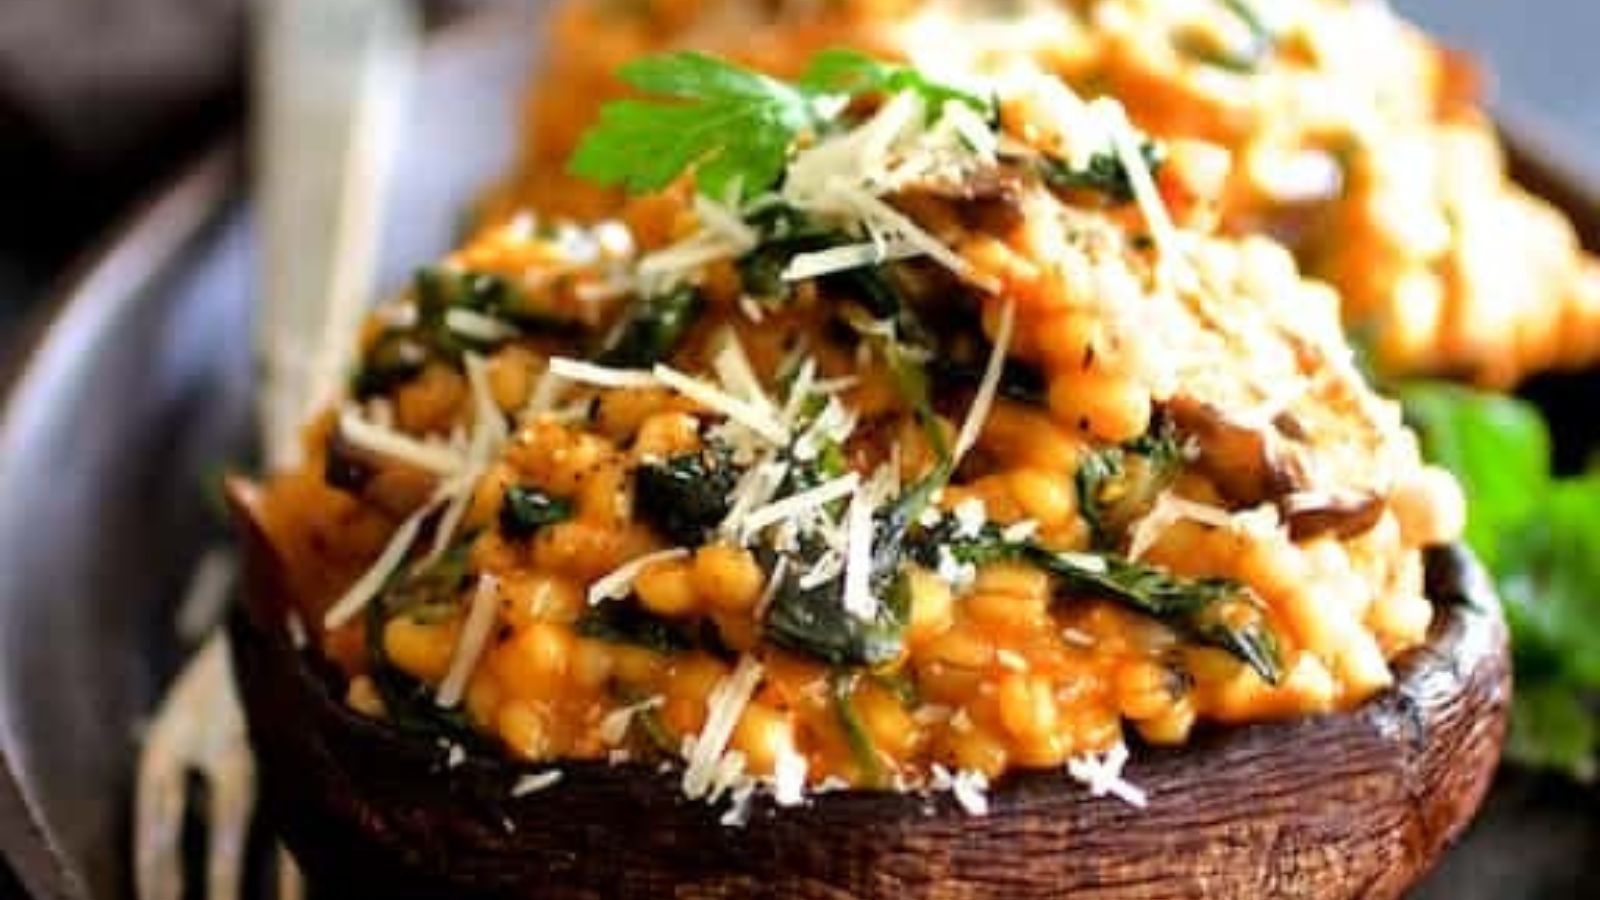 A plate of stuffed mushrooms with barley, cheese, and spinach.